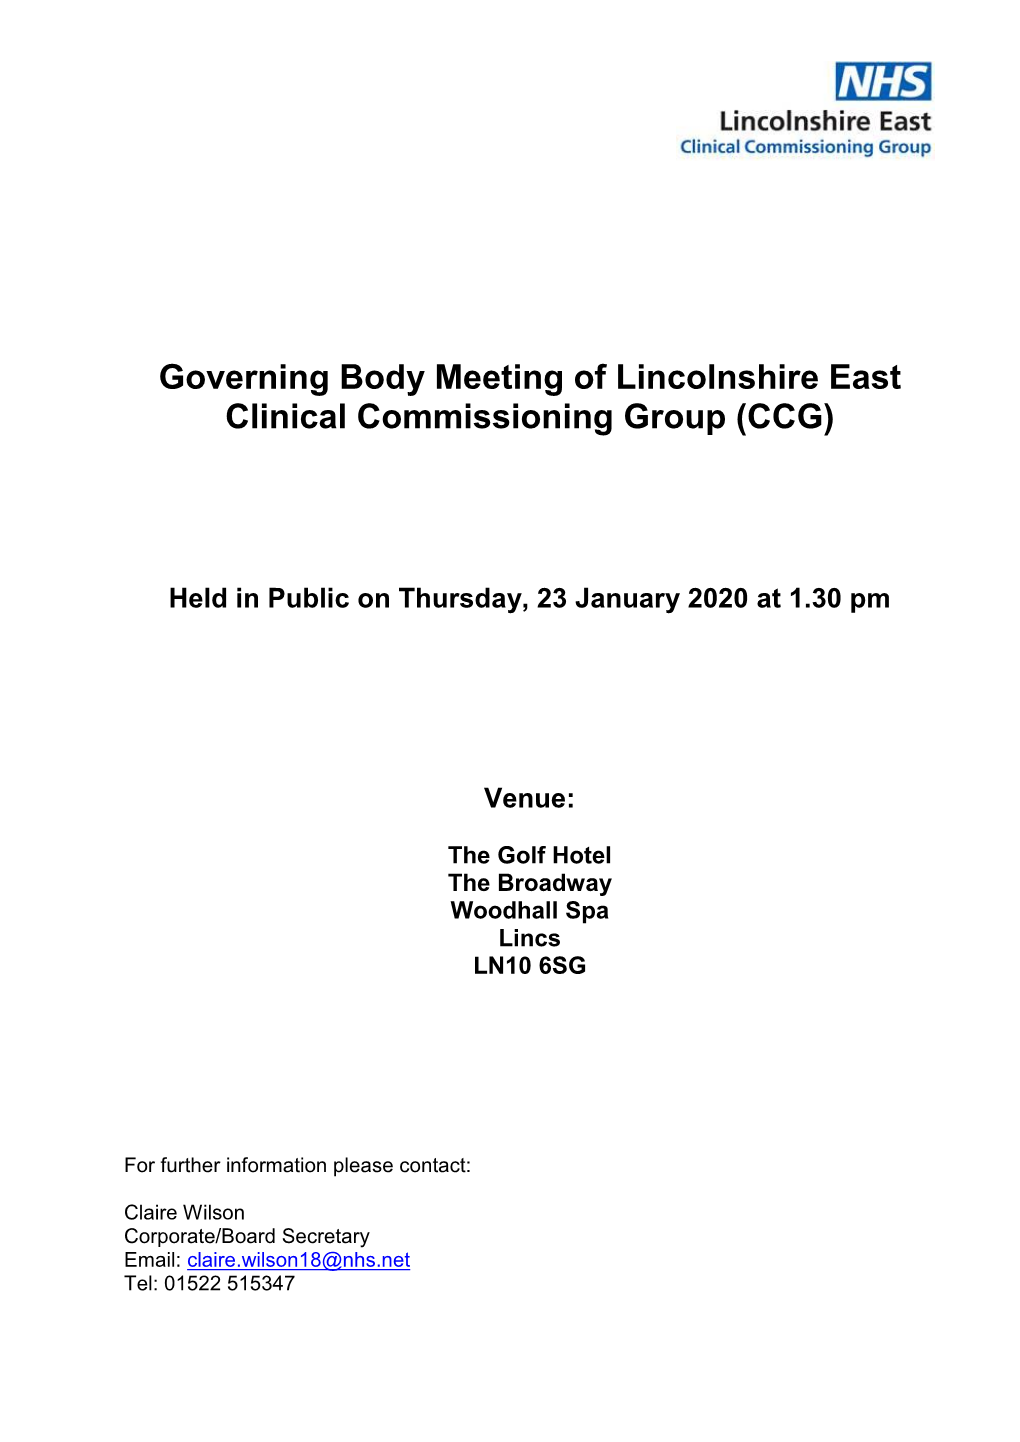 Governing Body Meeting of Lincolnshire East Clinical Commissioning Group (CCG)